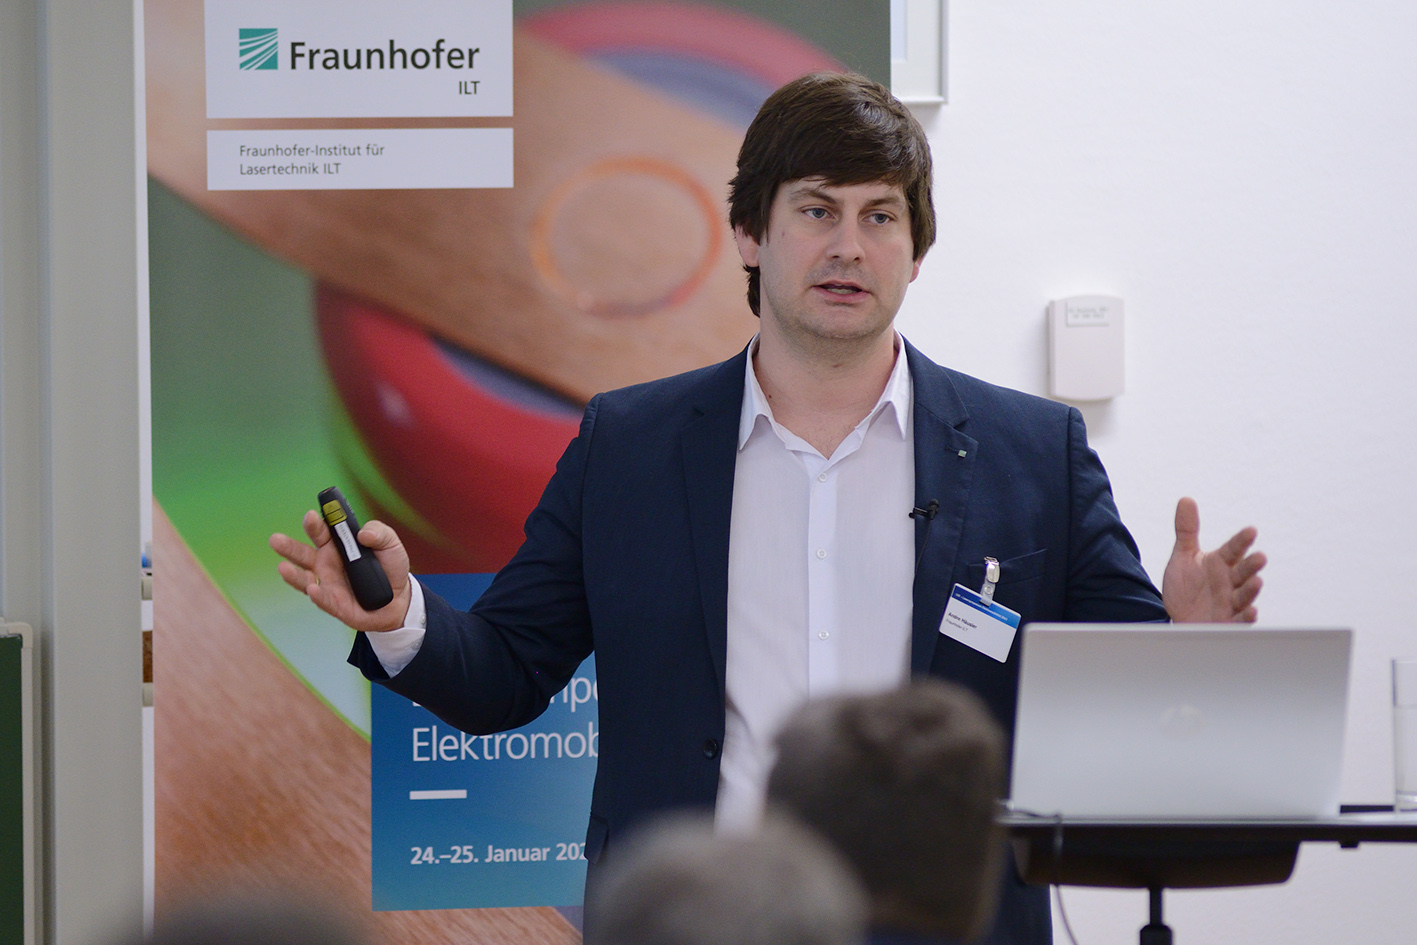 Dr. André Häusler, Group Leader for Joining of Metals at Fraunhofer ILT, presented the planned Battery Launch Center NRW, which has already been able to win partners such as Kuka, LBBZ and RWTH Aachen University as supporters.